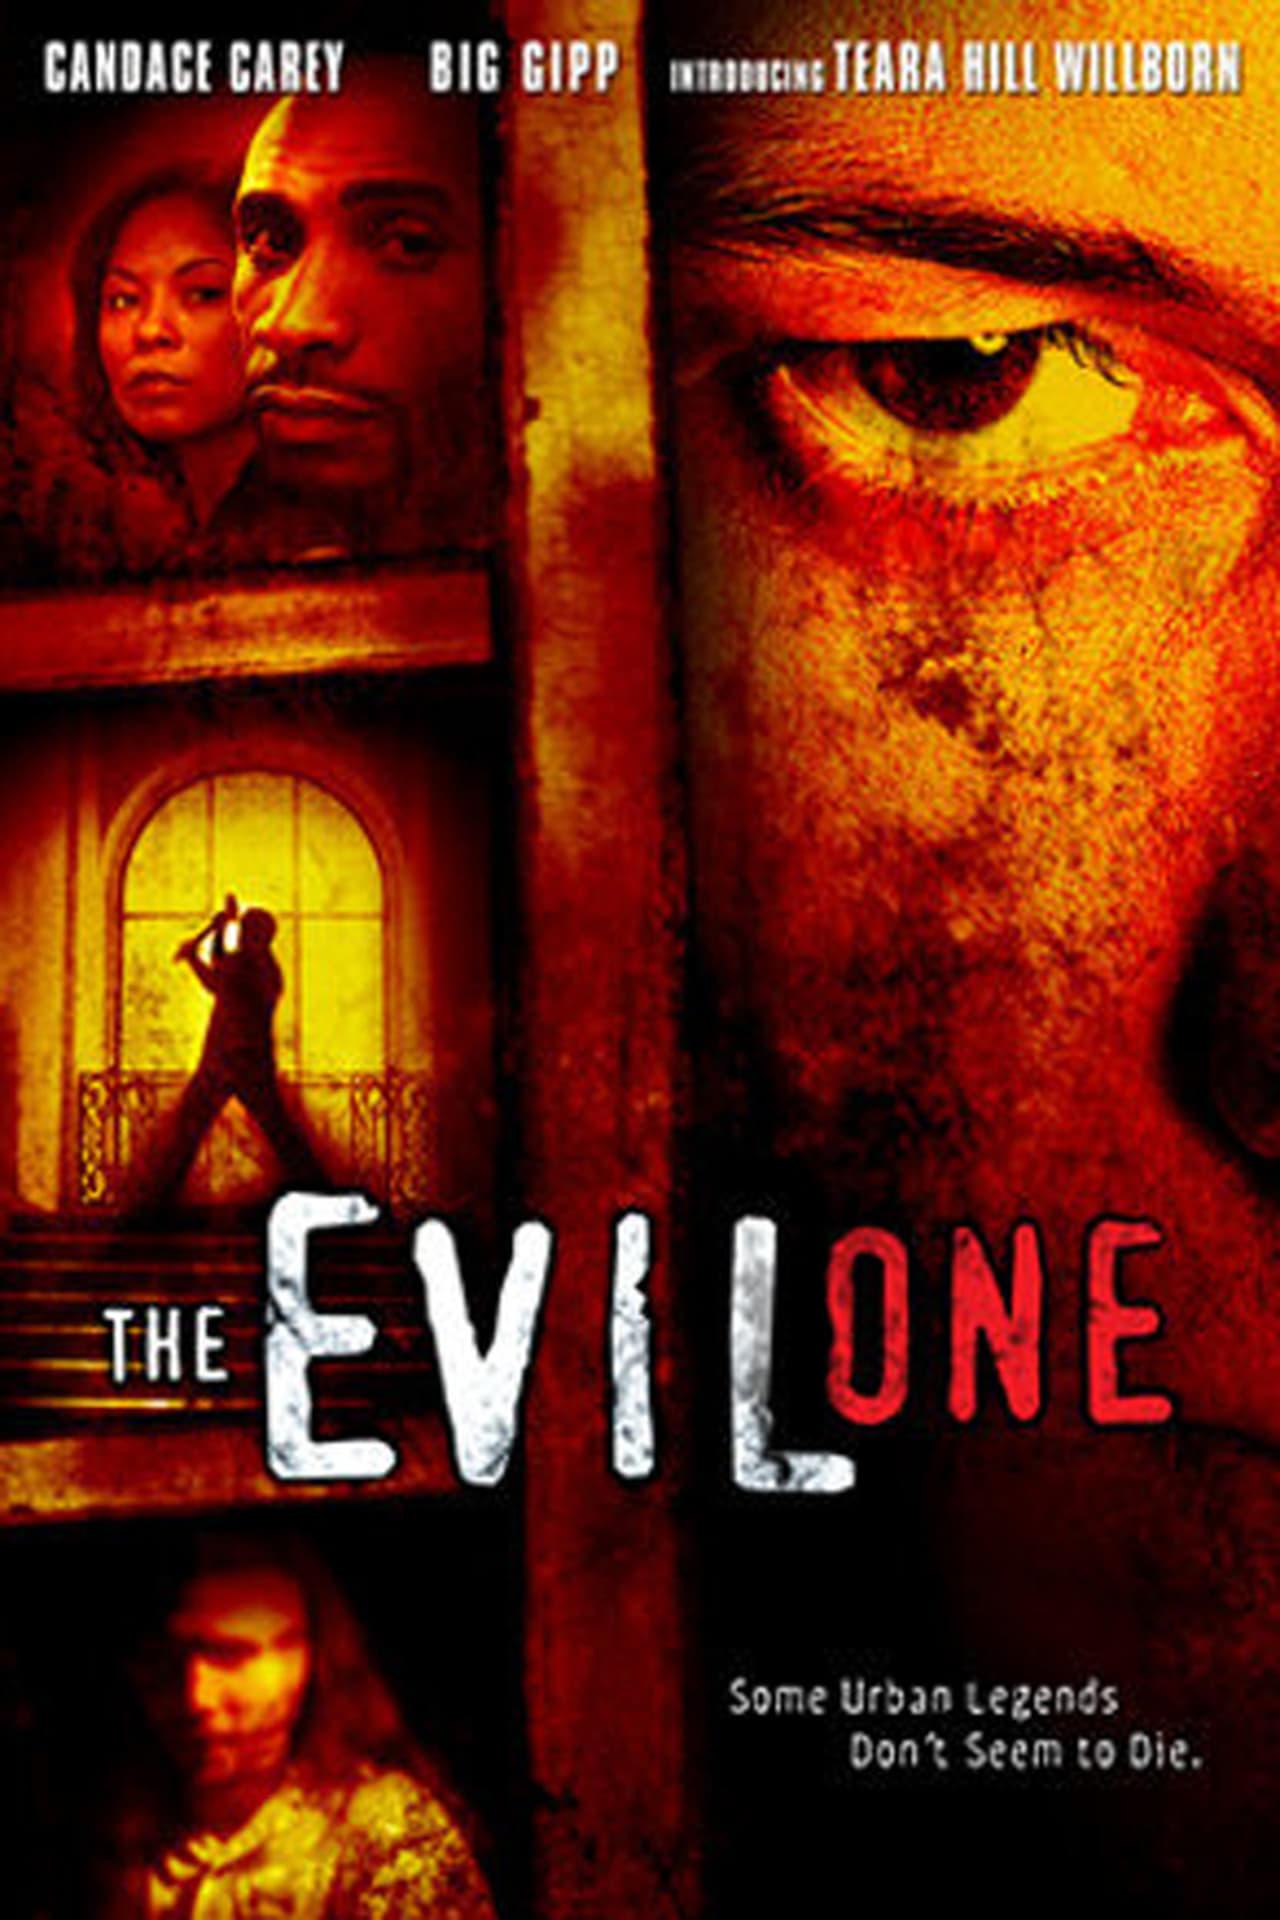 The Evil One poster